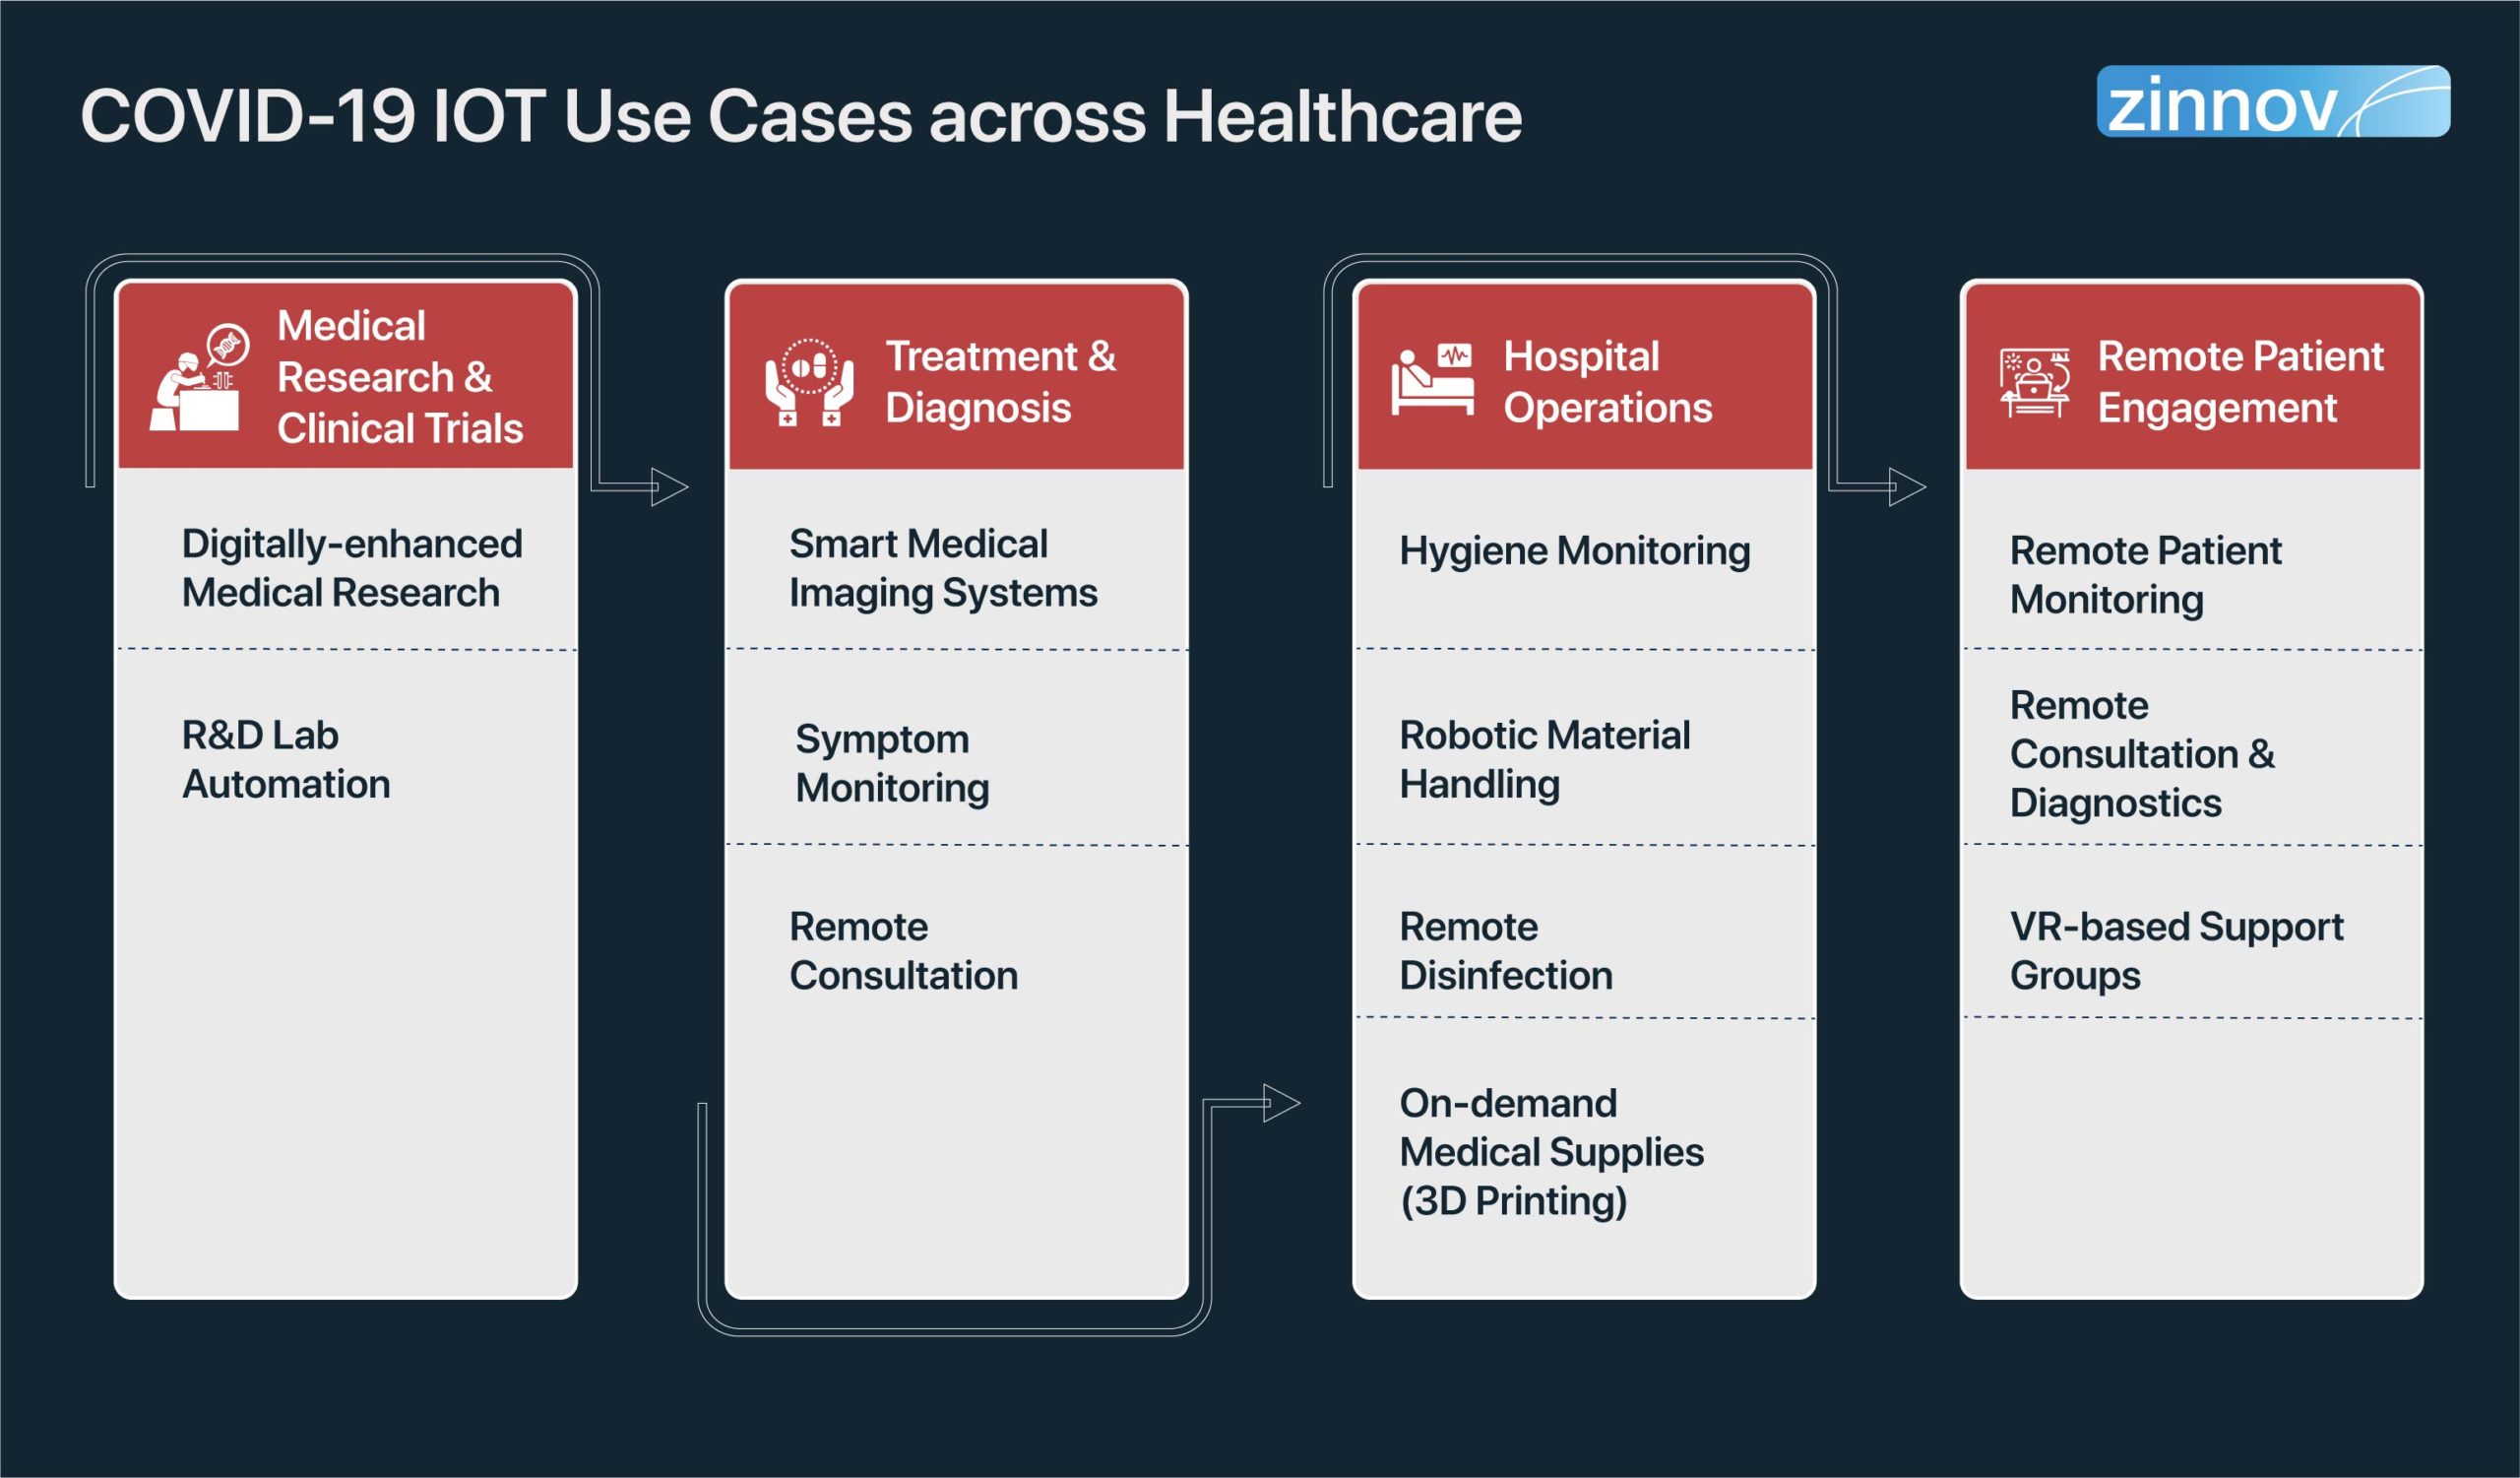 COVID-19 IOT use cases across healthcare